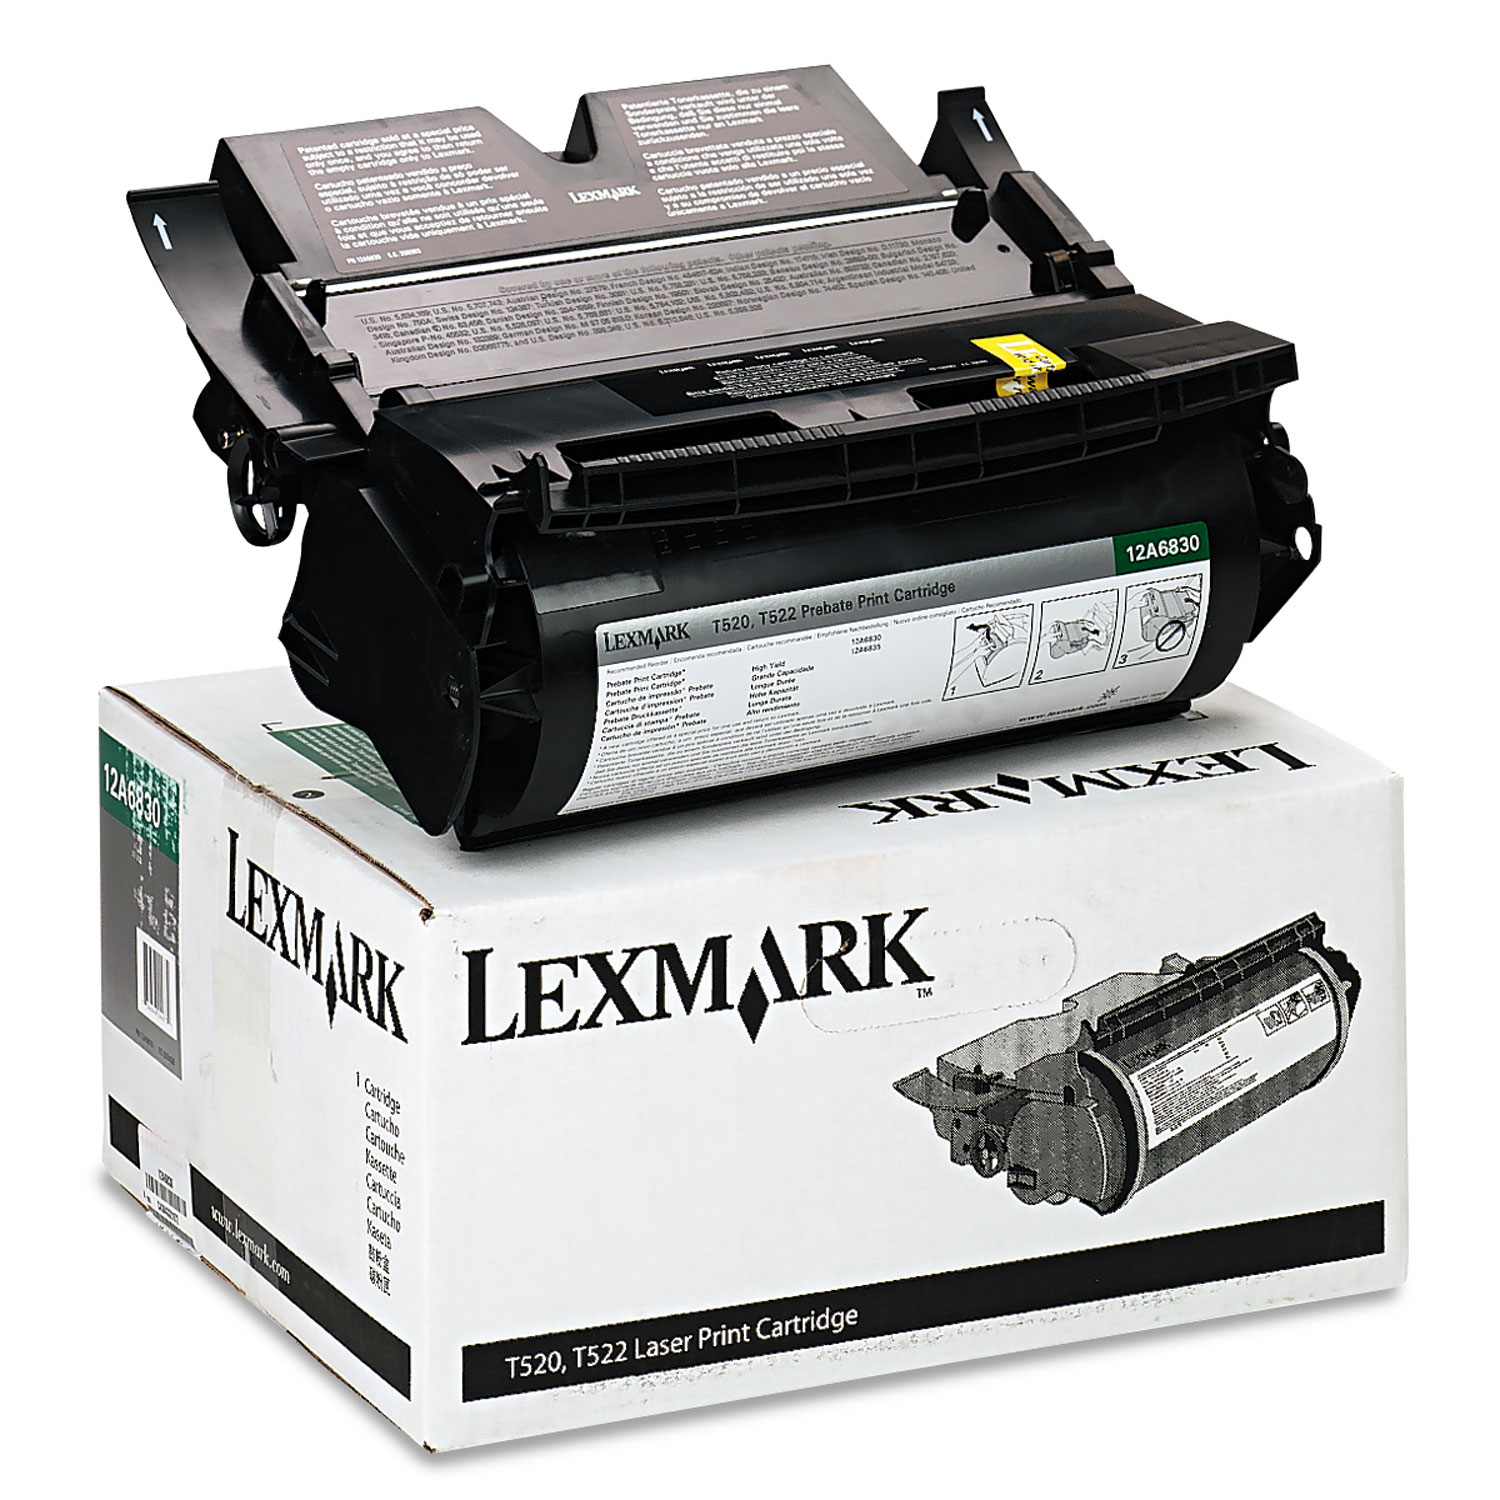 12A6830 Toner, 7500 Page-Yield, Black